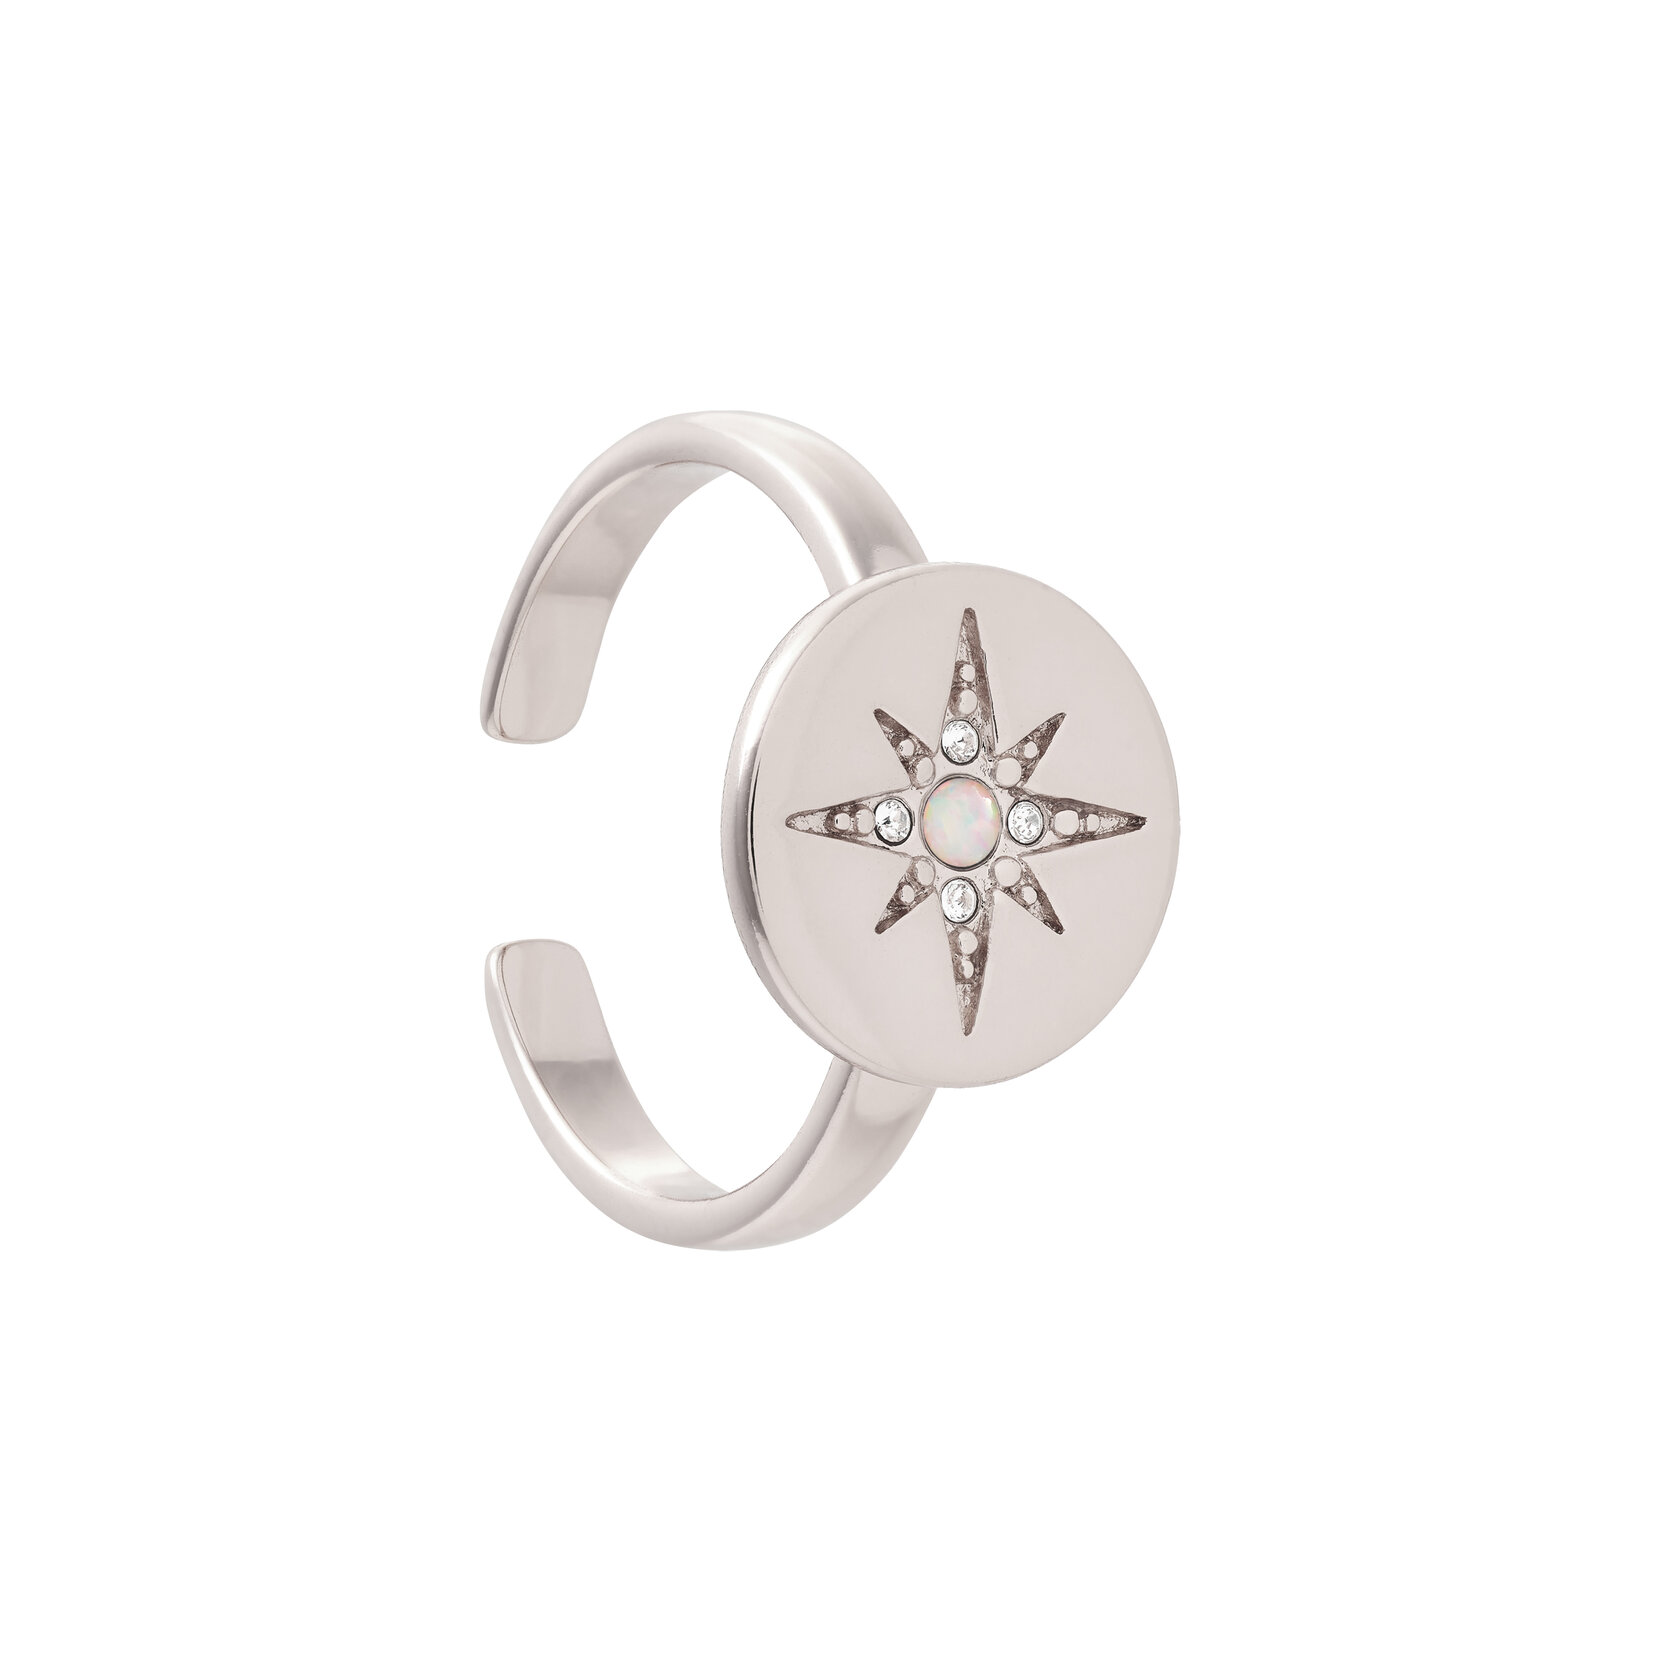 Silver North Star Ring